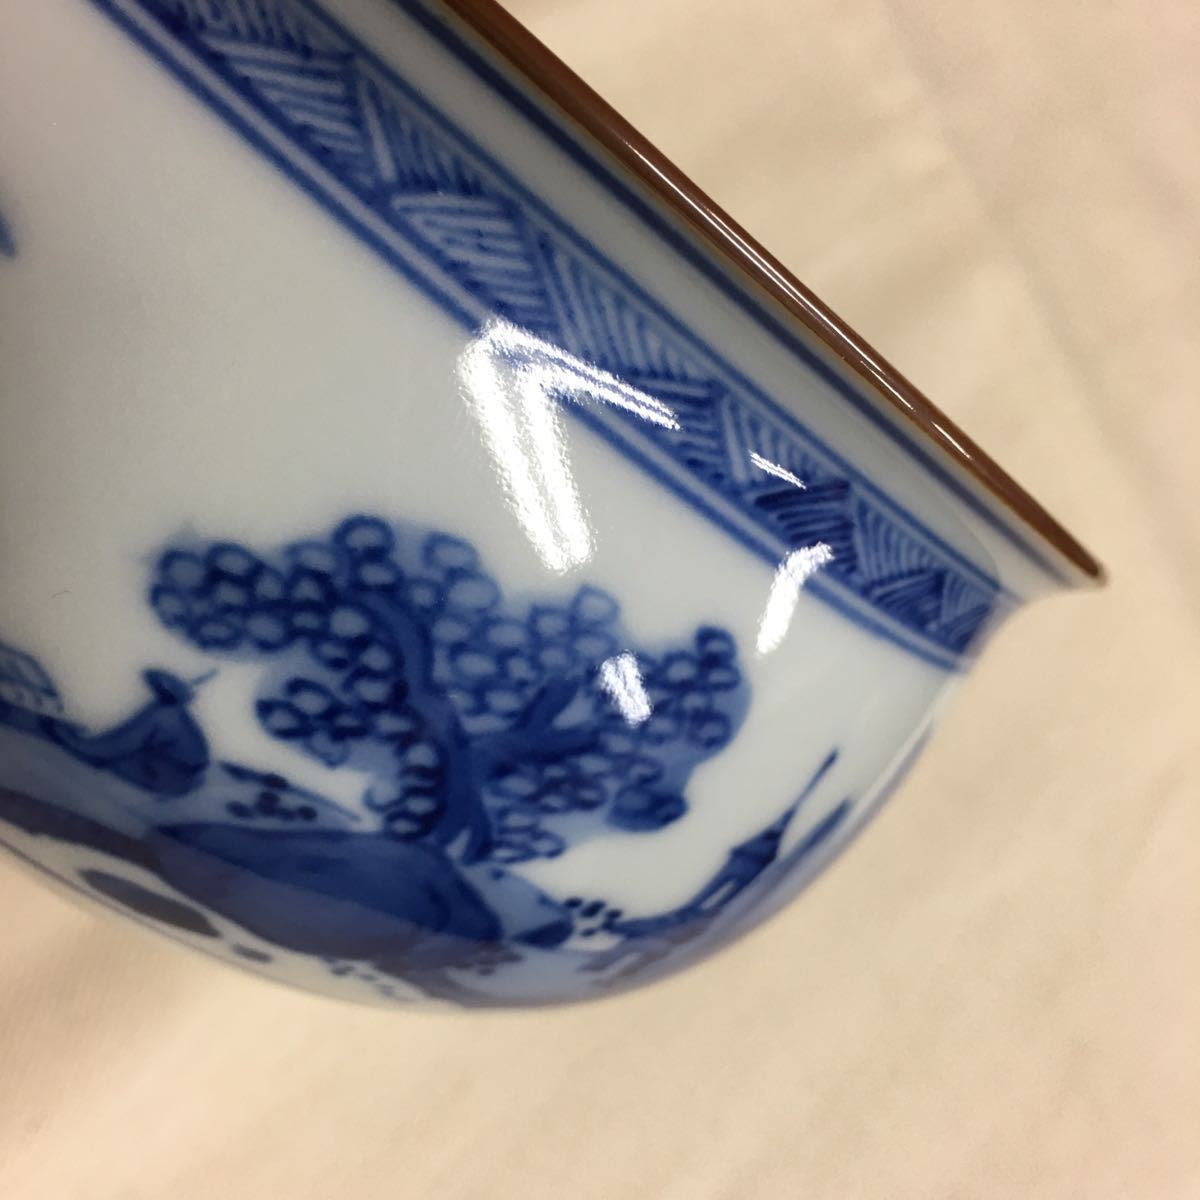  censer . equipped tea utensils blue . blue and white ceramics tea cup tea utensils teacup pot China Tang thing fragrance 